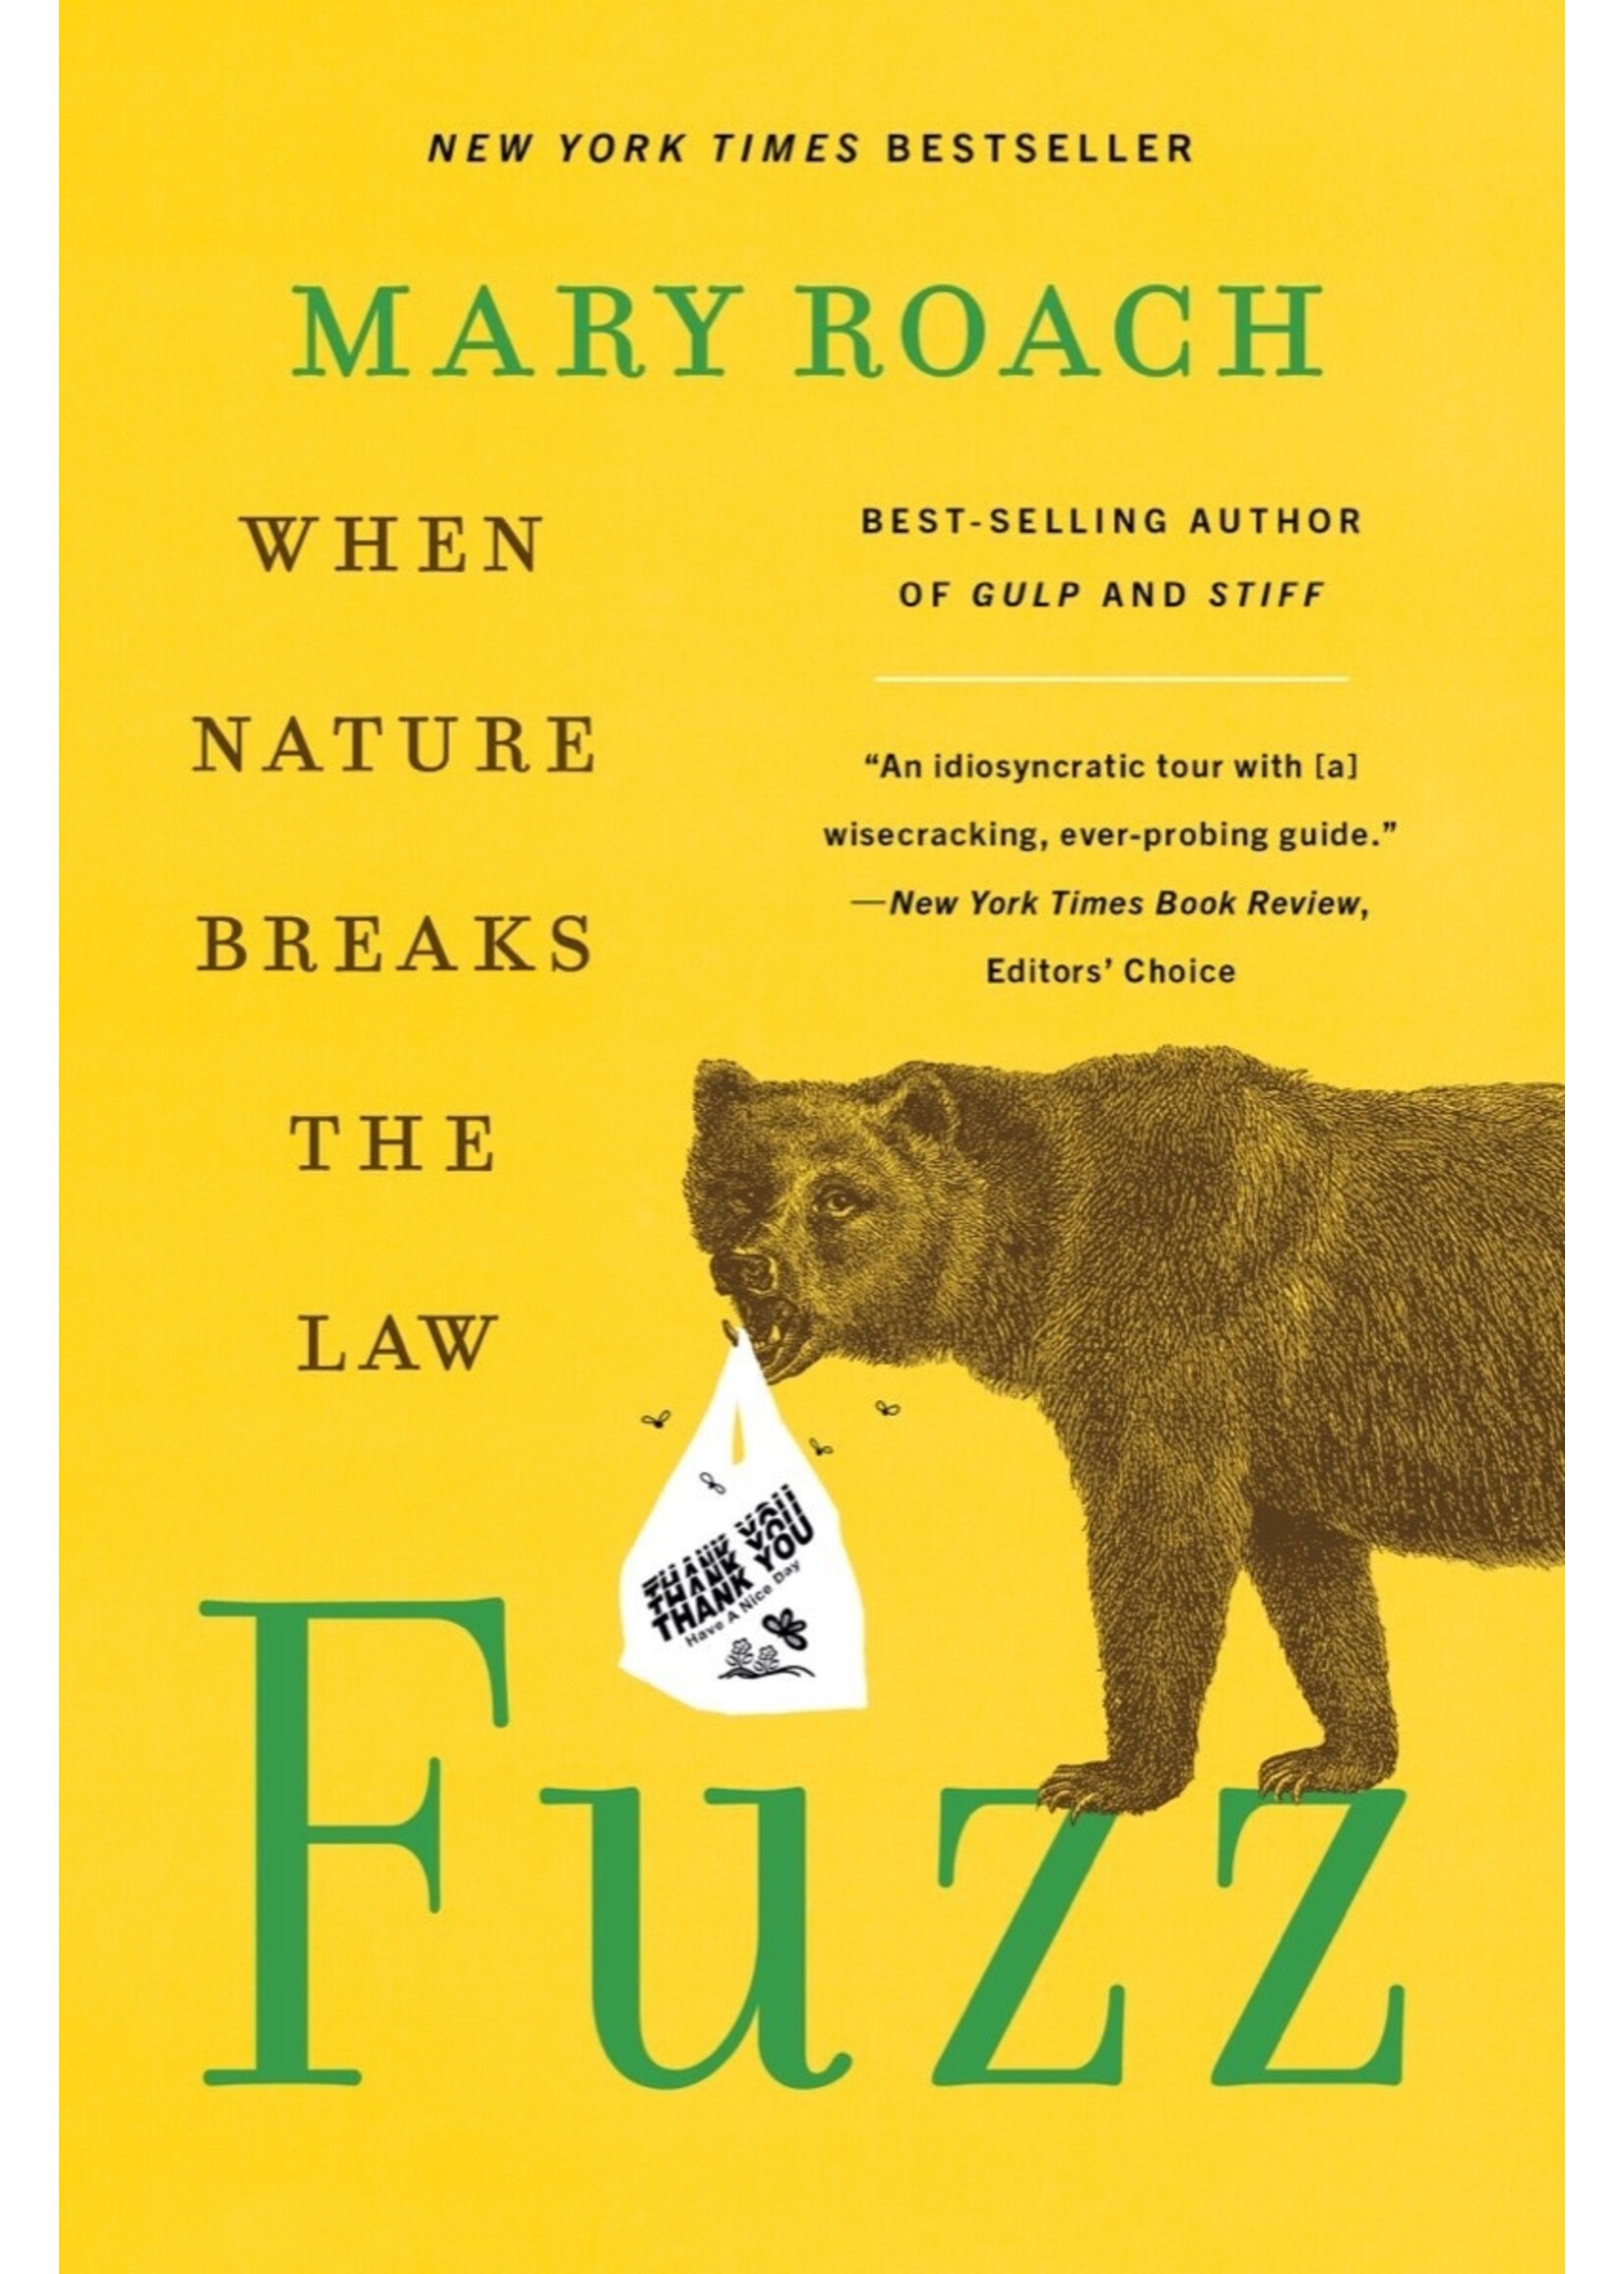 Fuzz: When Nature Breaks the Law by Mary Roach